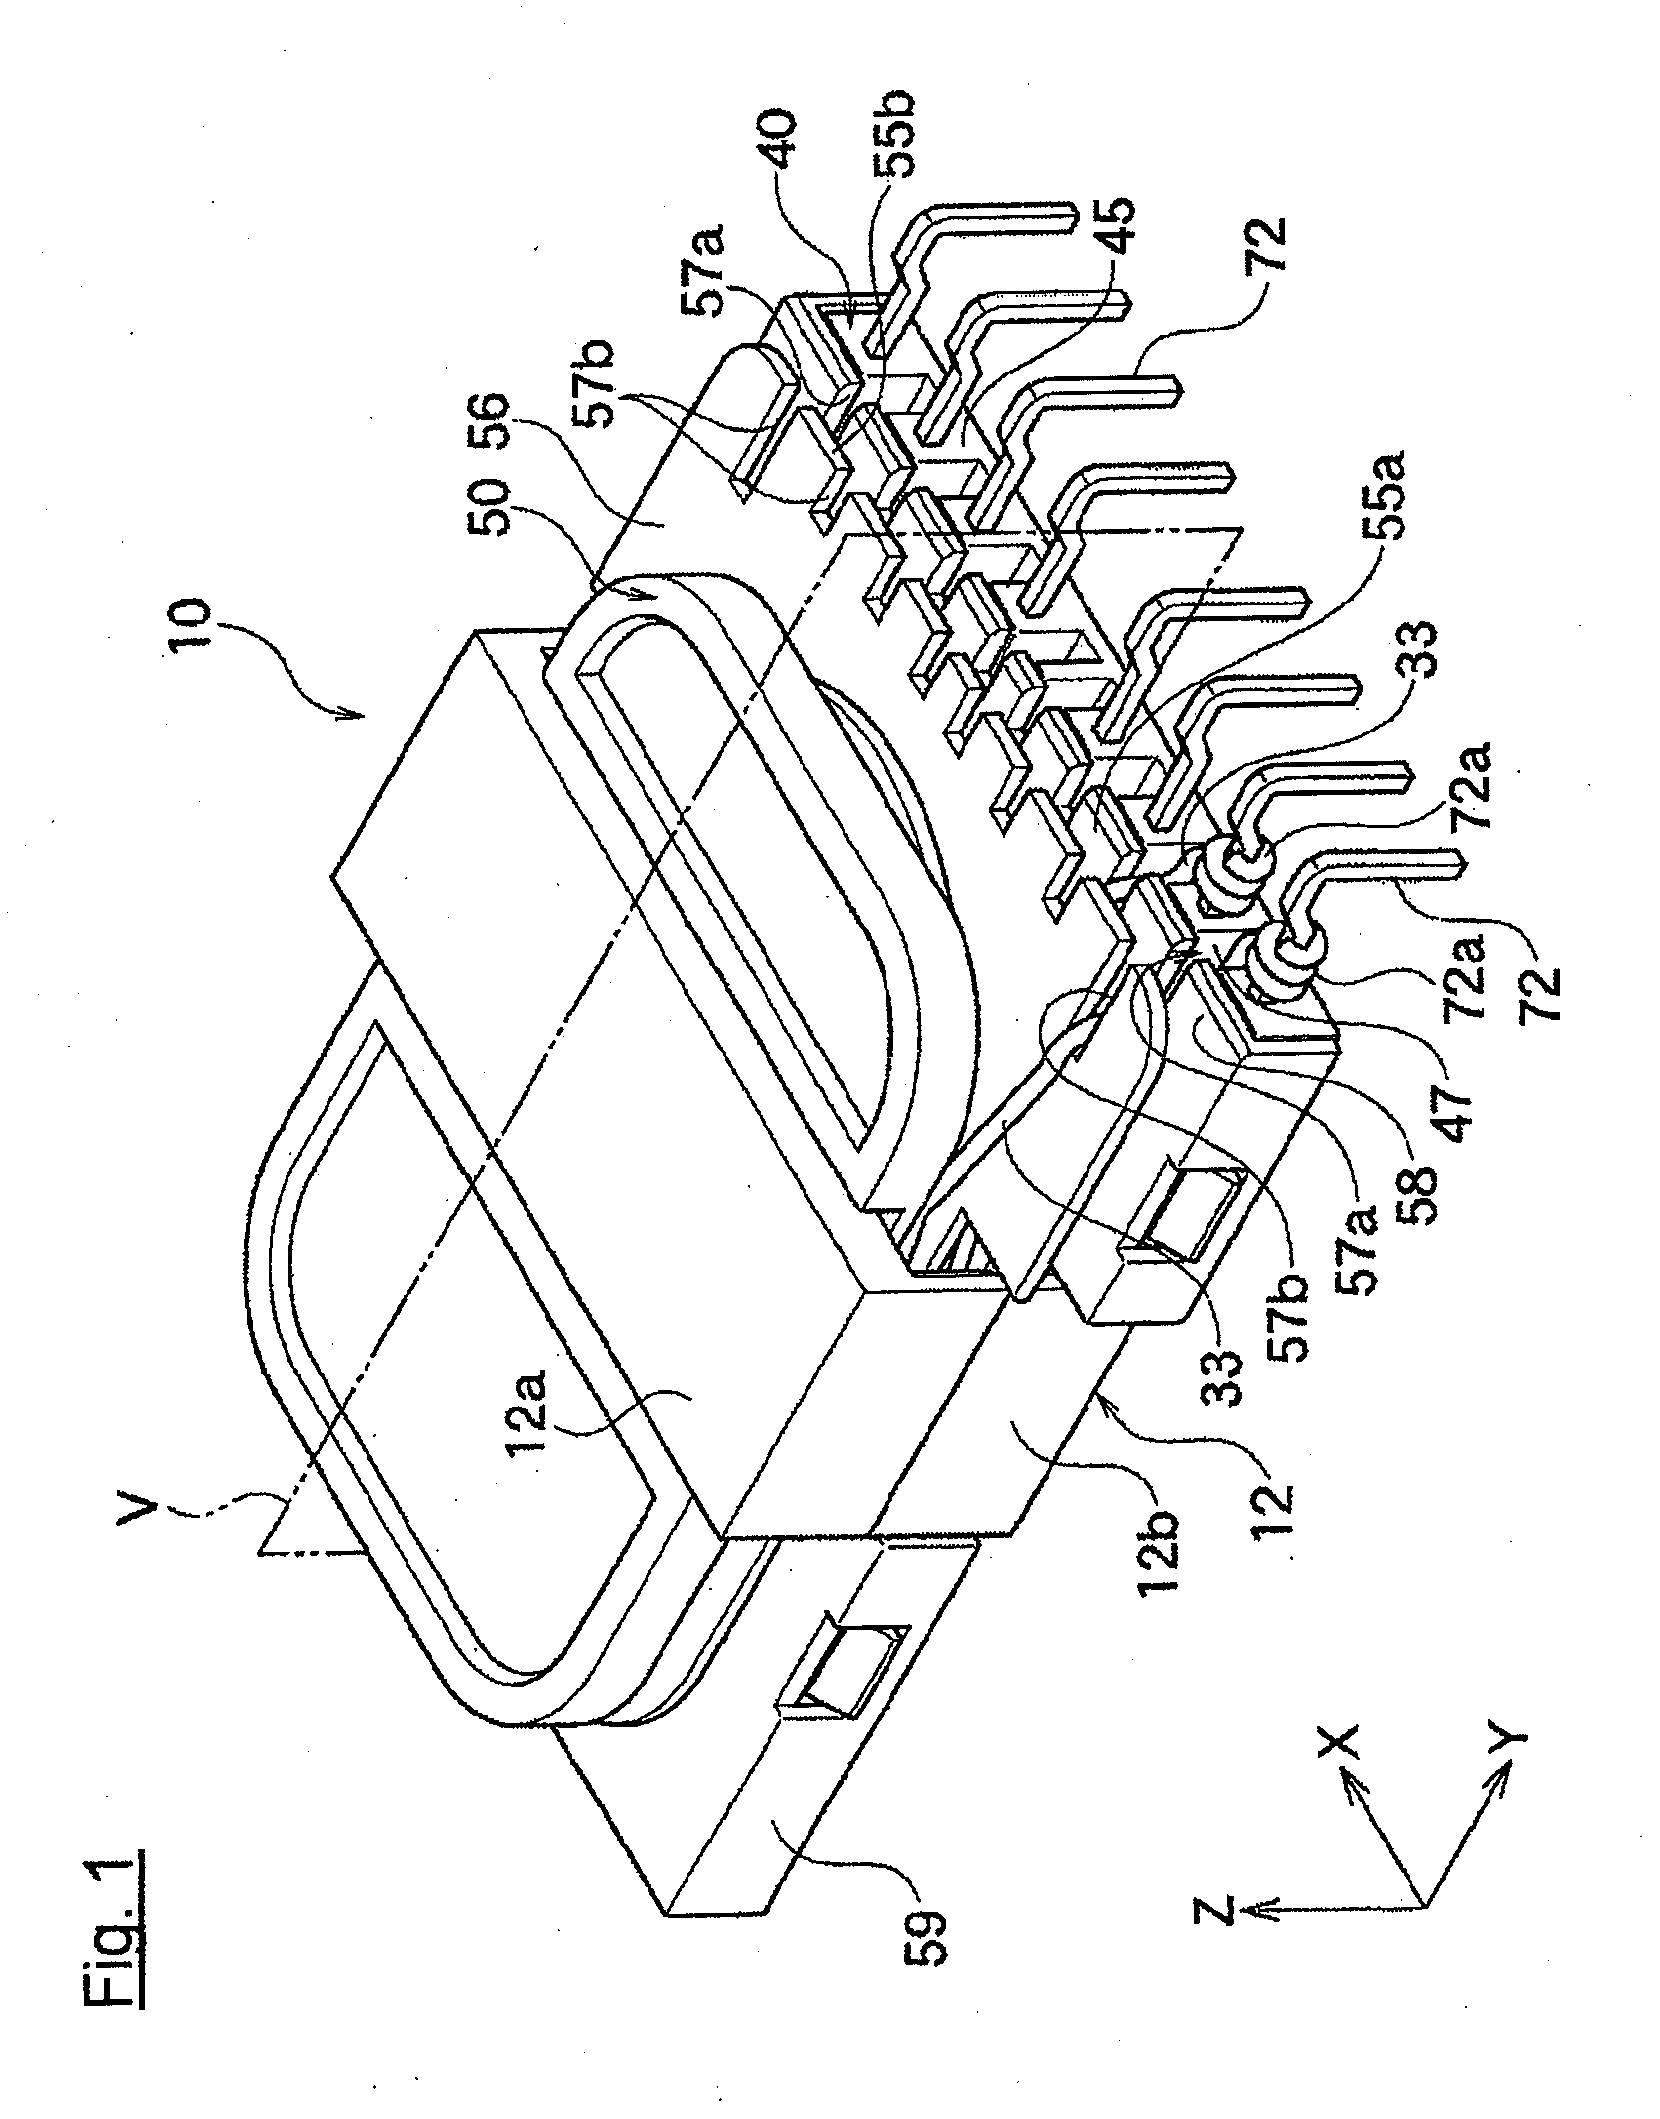 Coil device